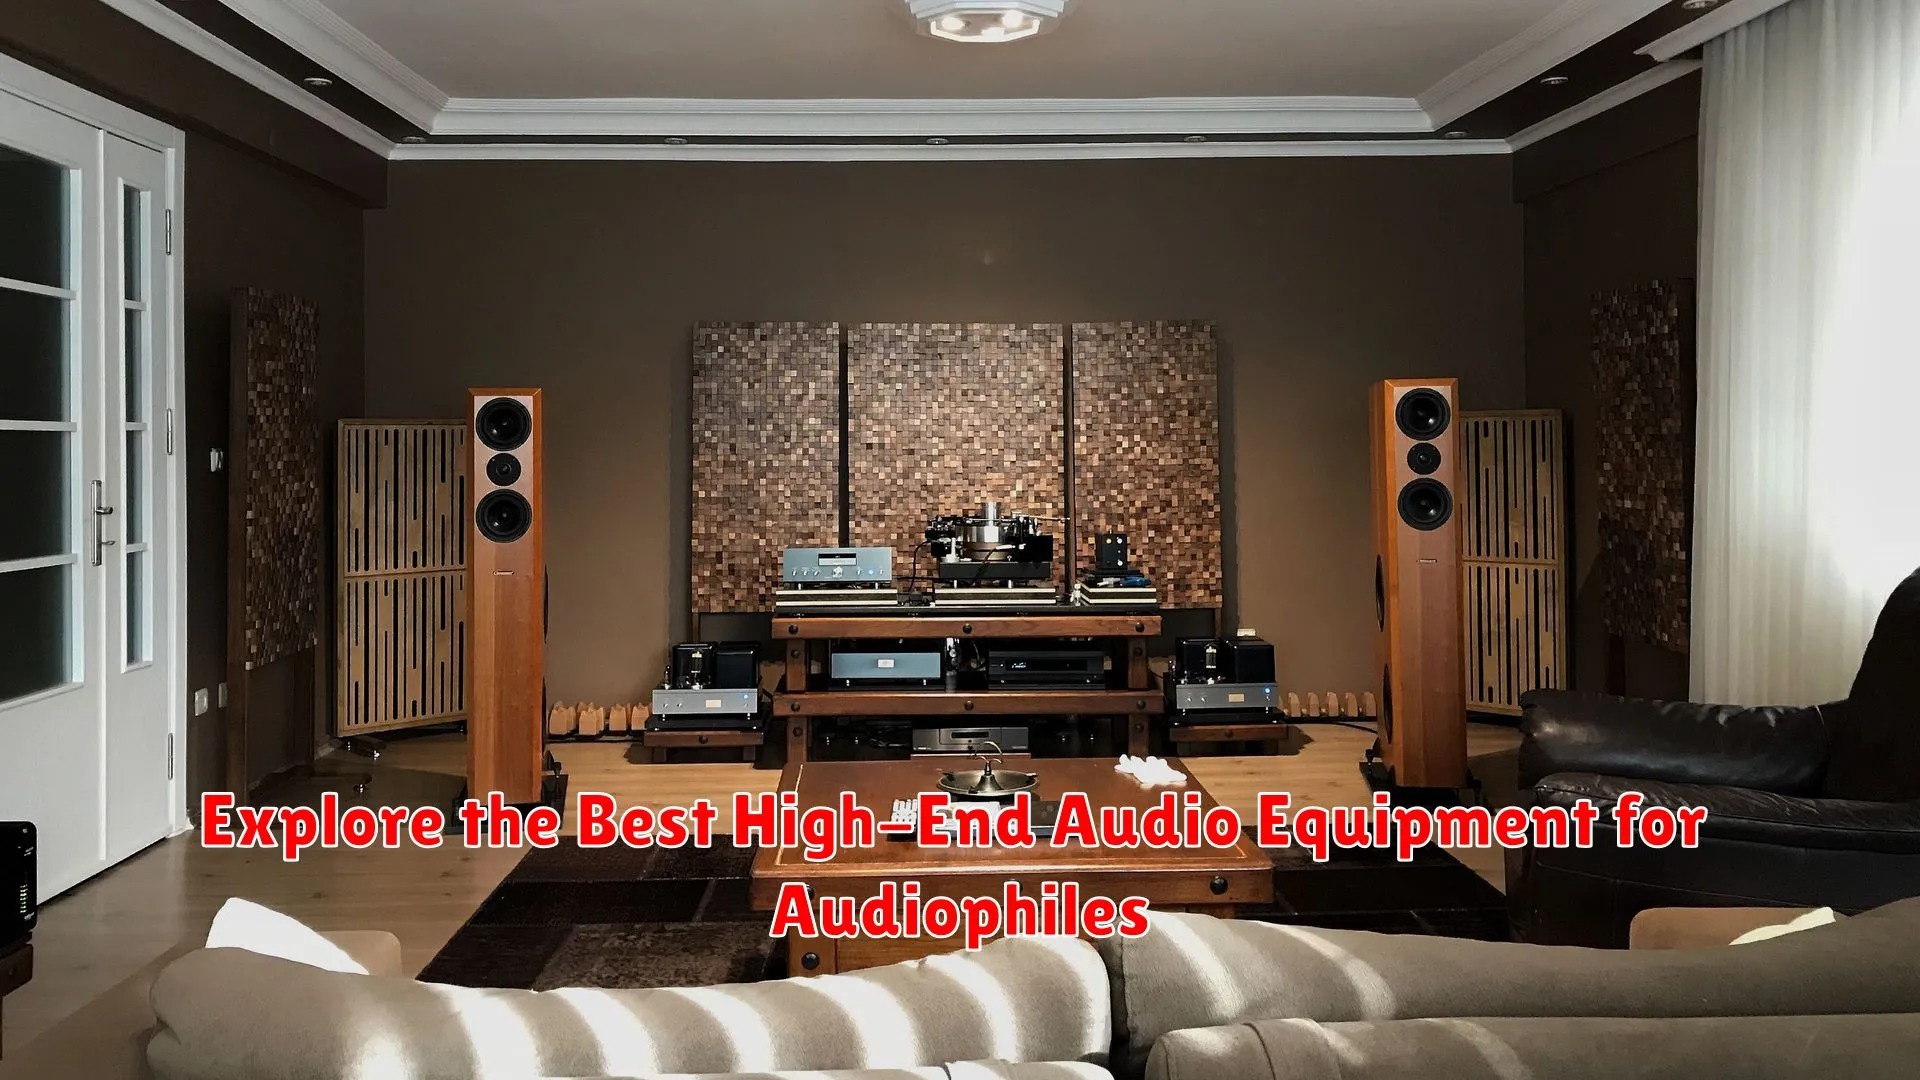 Explore the Best High-End Audio Equipment for Audiophiles